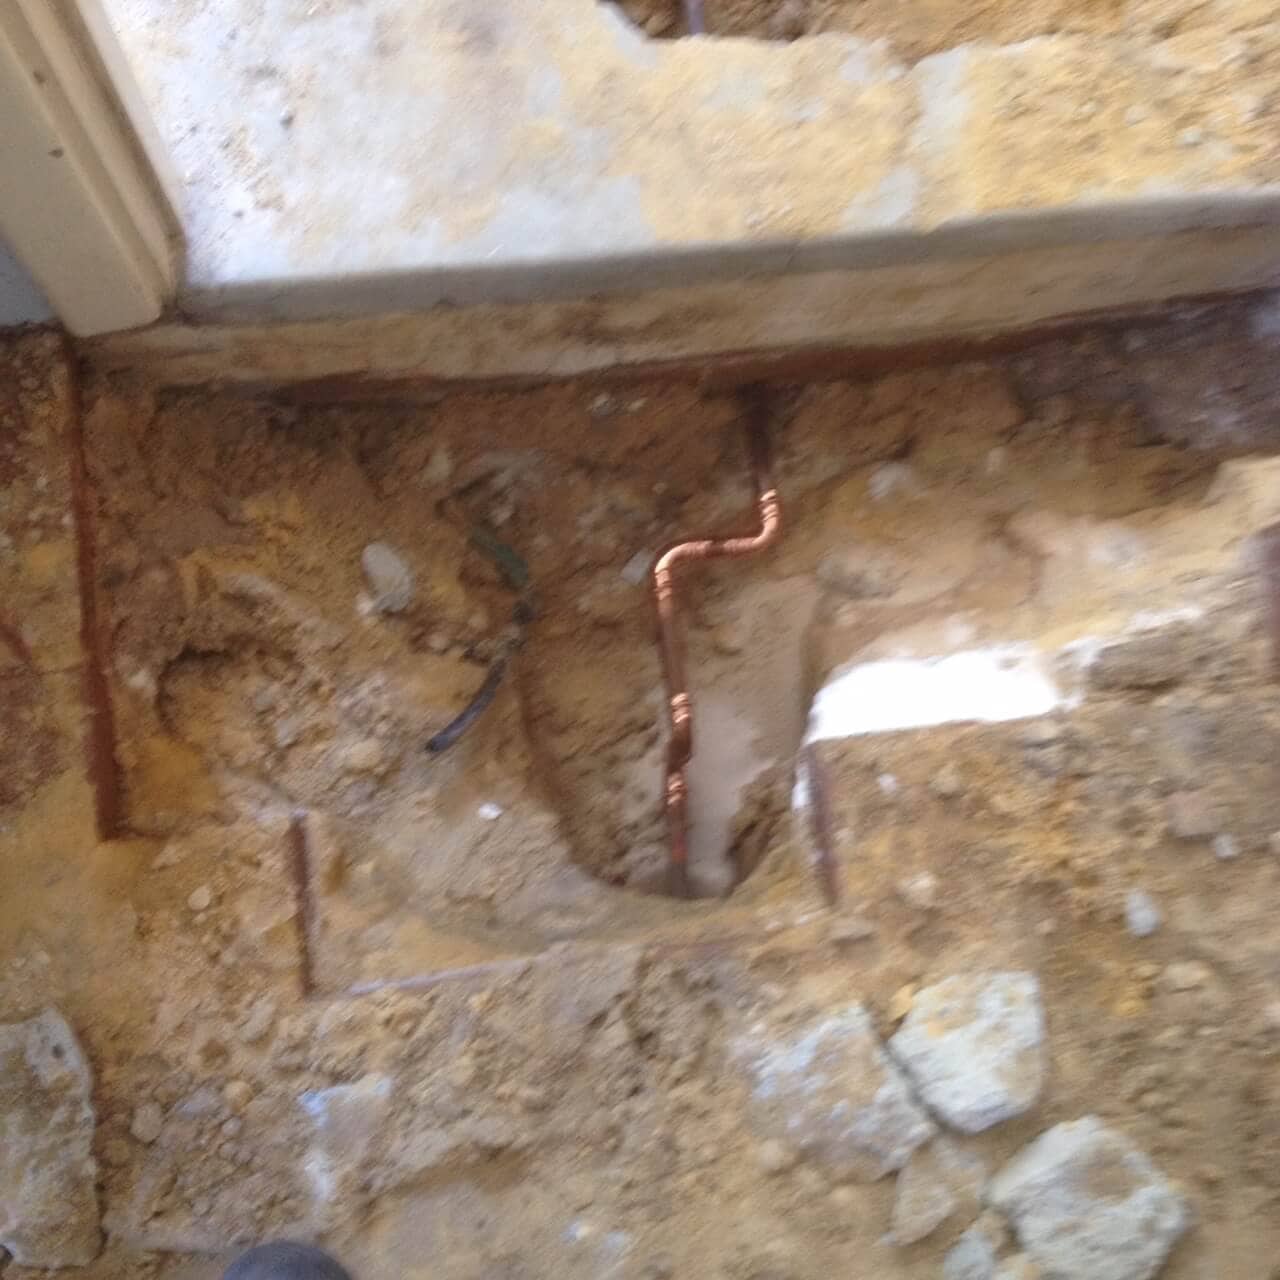 Everyday Plumbers Residential Corroded Pipes Repair - Corroded Pipe Bent Pipes 2513